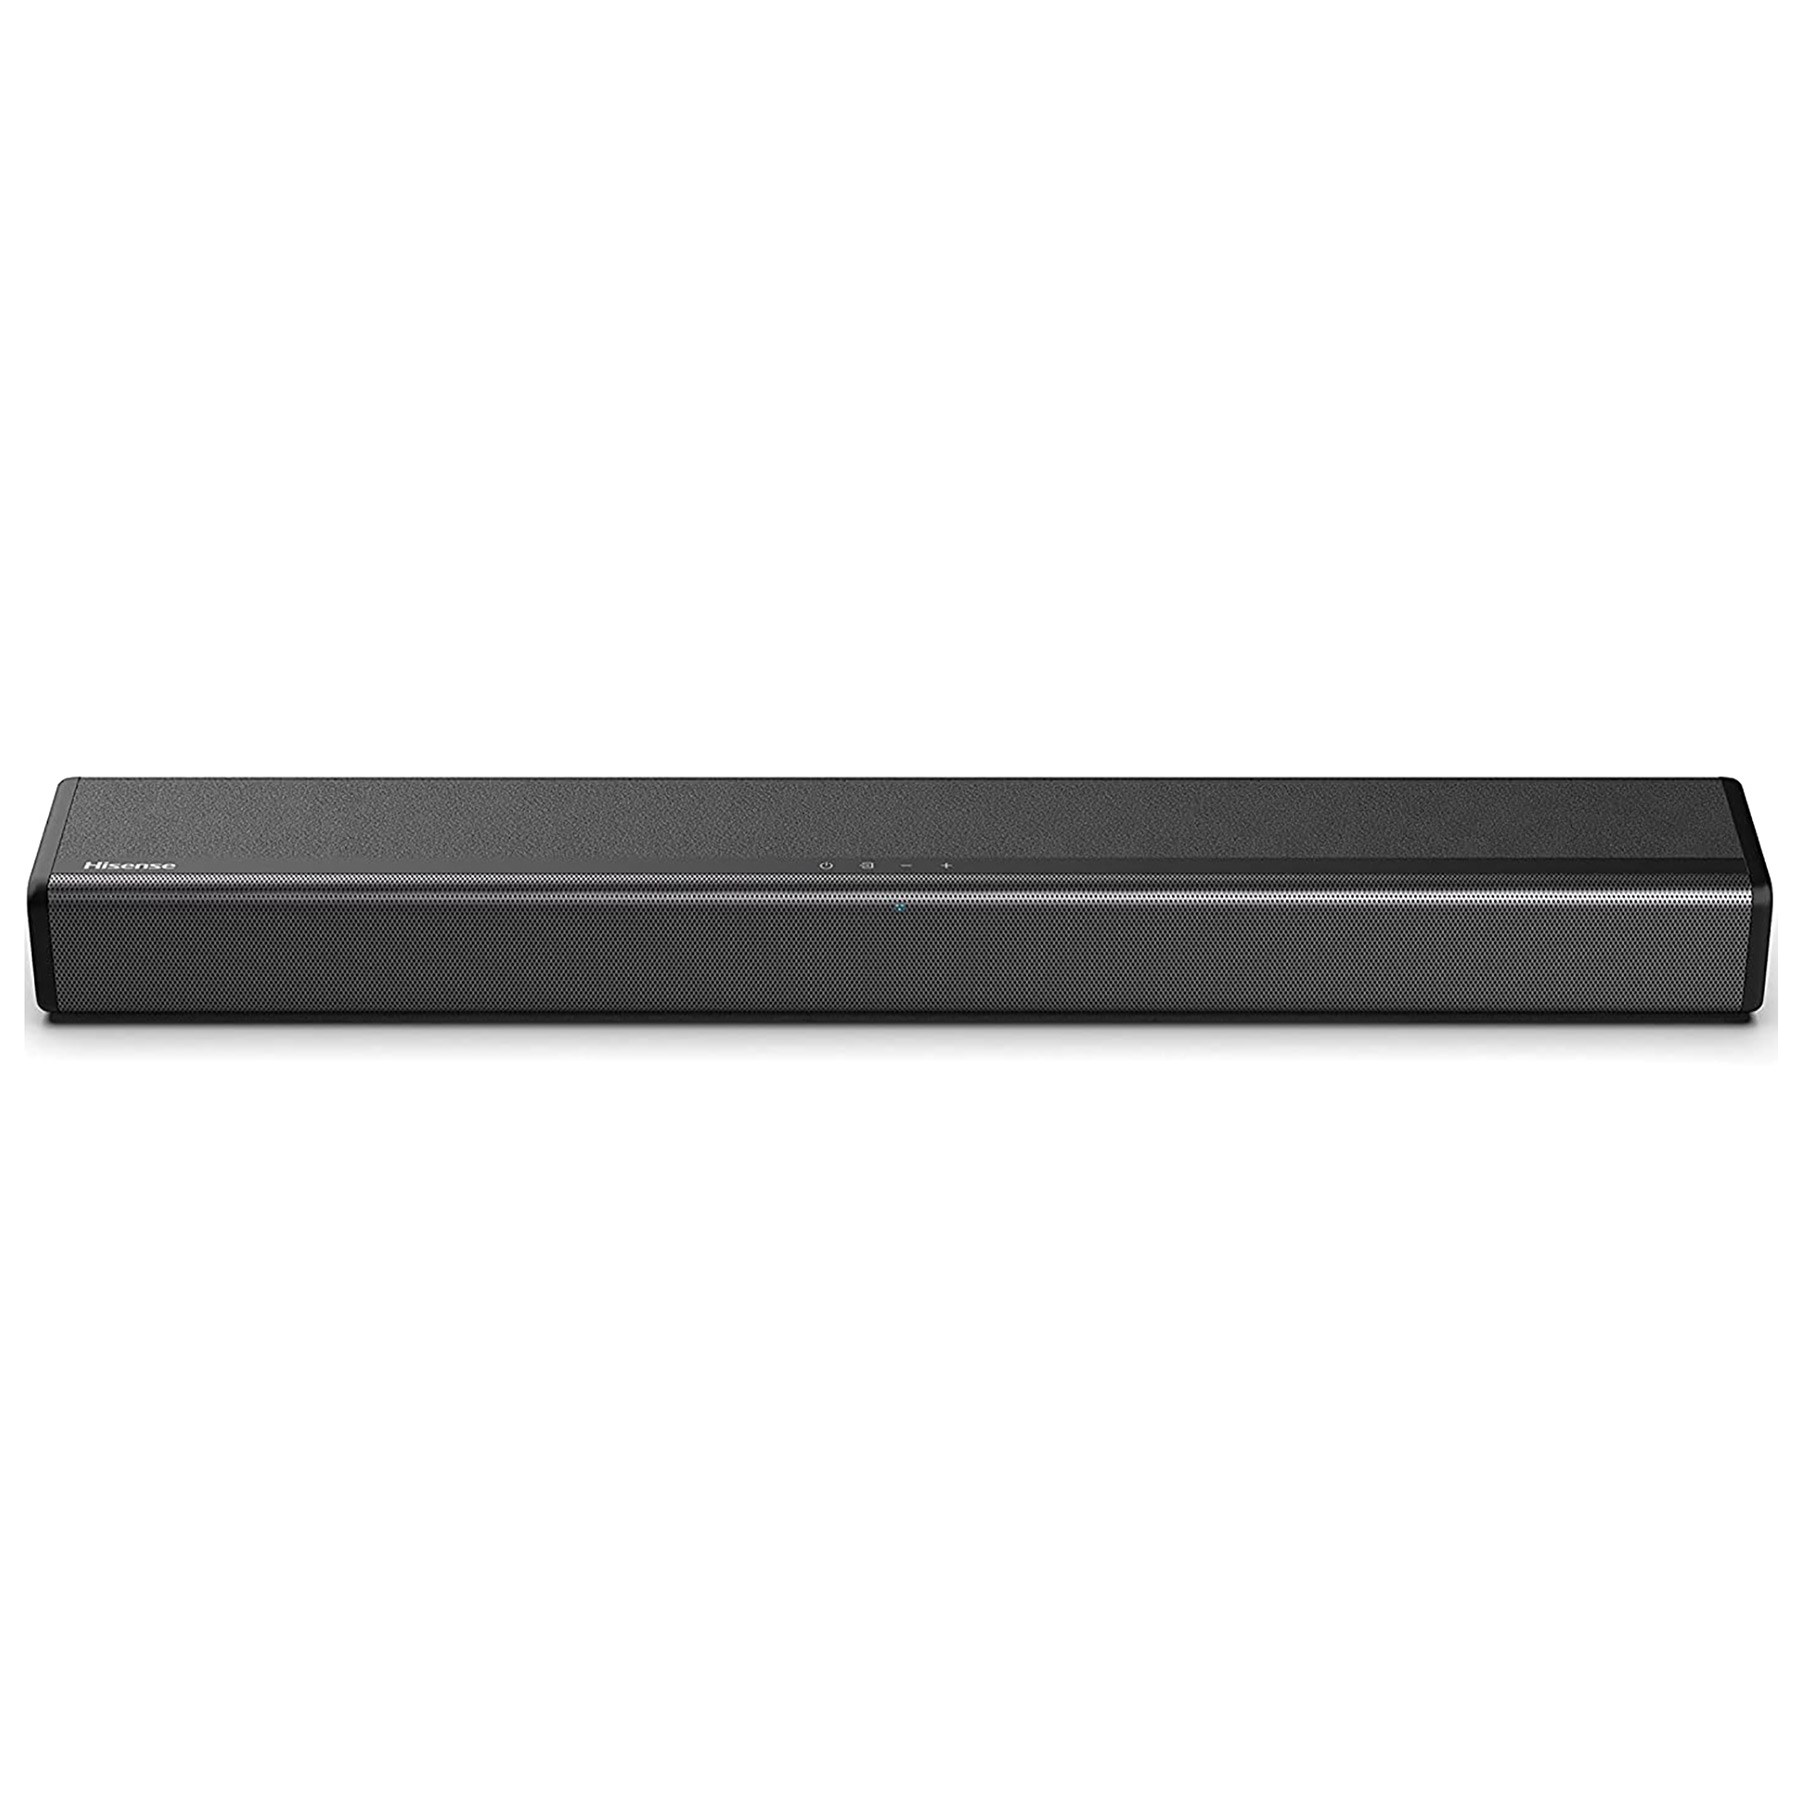 Image of Hisense HS214 2 1Ch All In One Soundbar with Built In Subwoofer